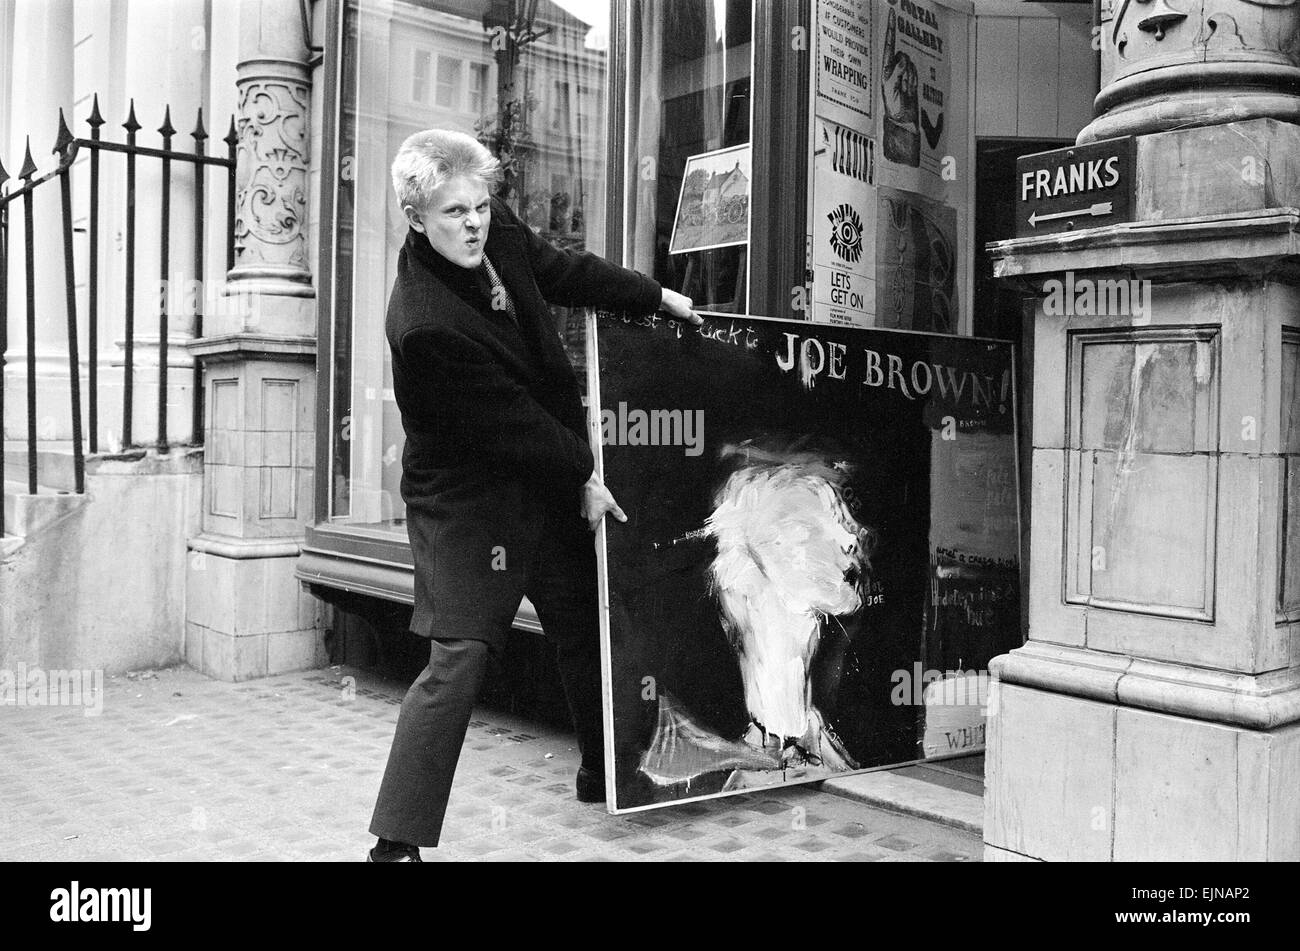 Singer Joe Brown collects a picture of himself from Portal Gallery, Grafton Street, W1. 5th July 1962. *** Local Caption *** watscan - - 05/03/2010 Stock Photo